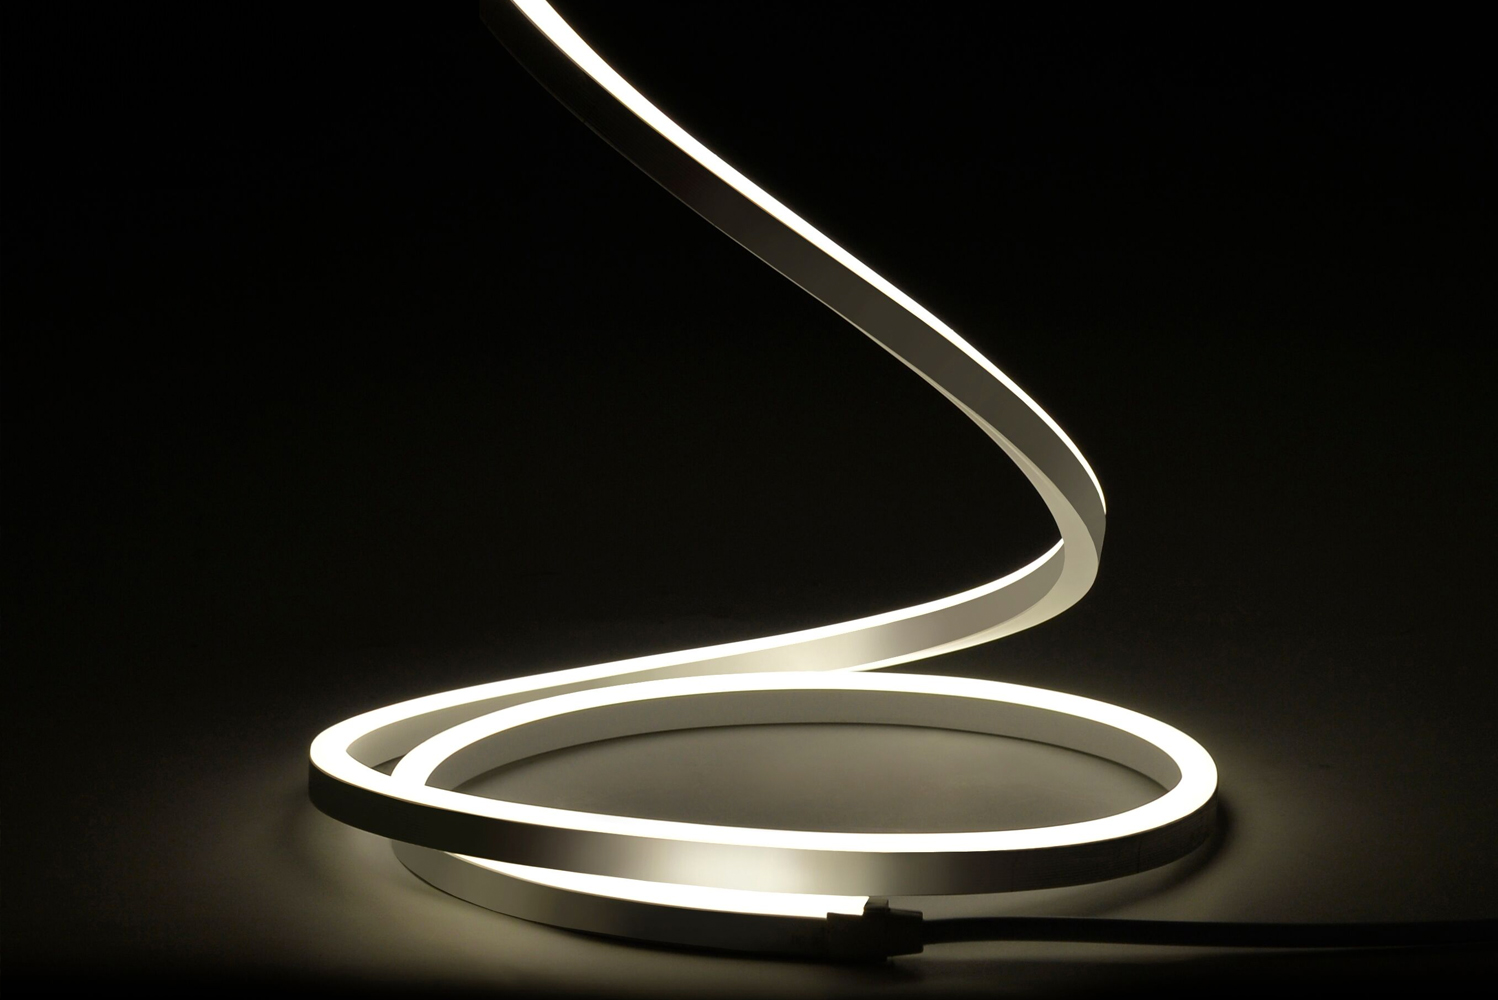 Feelux Lighting launched the FLXible Neon